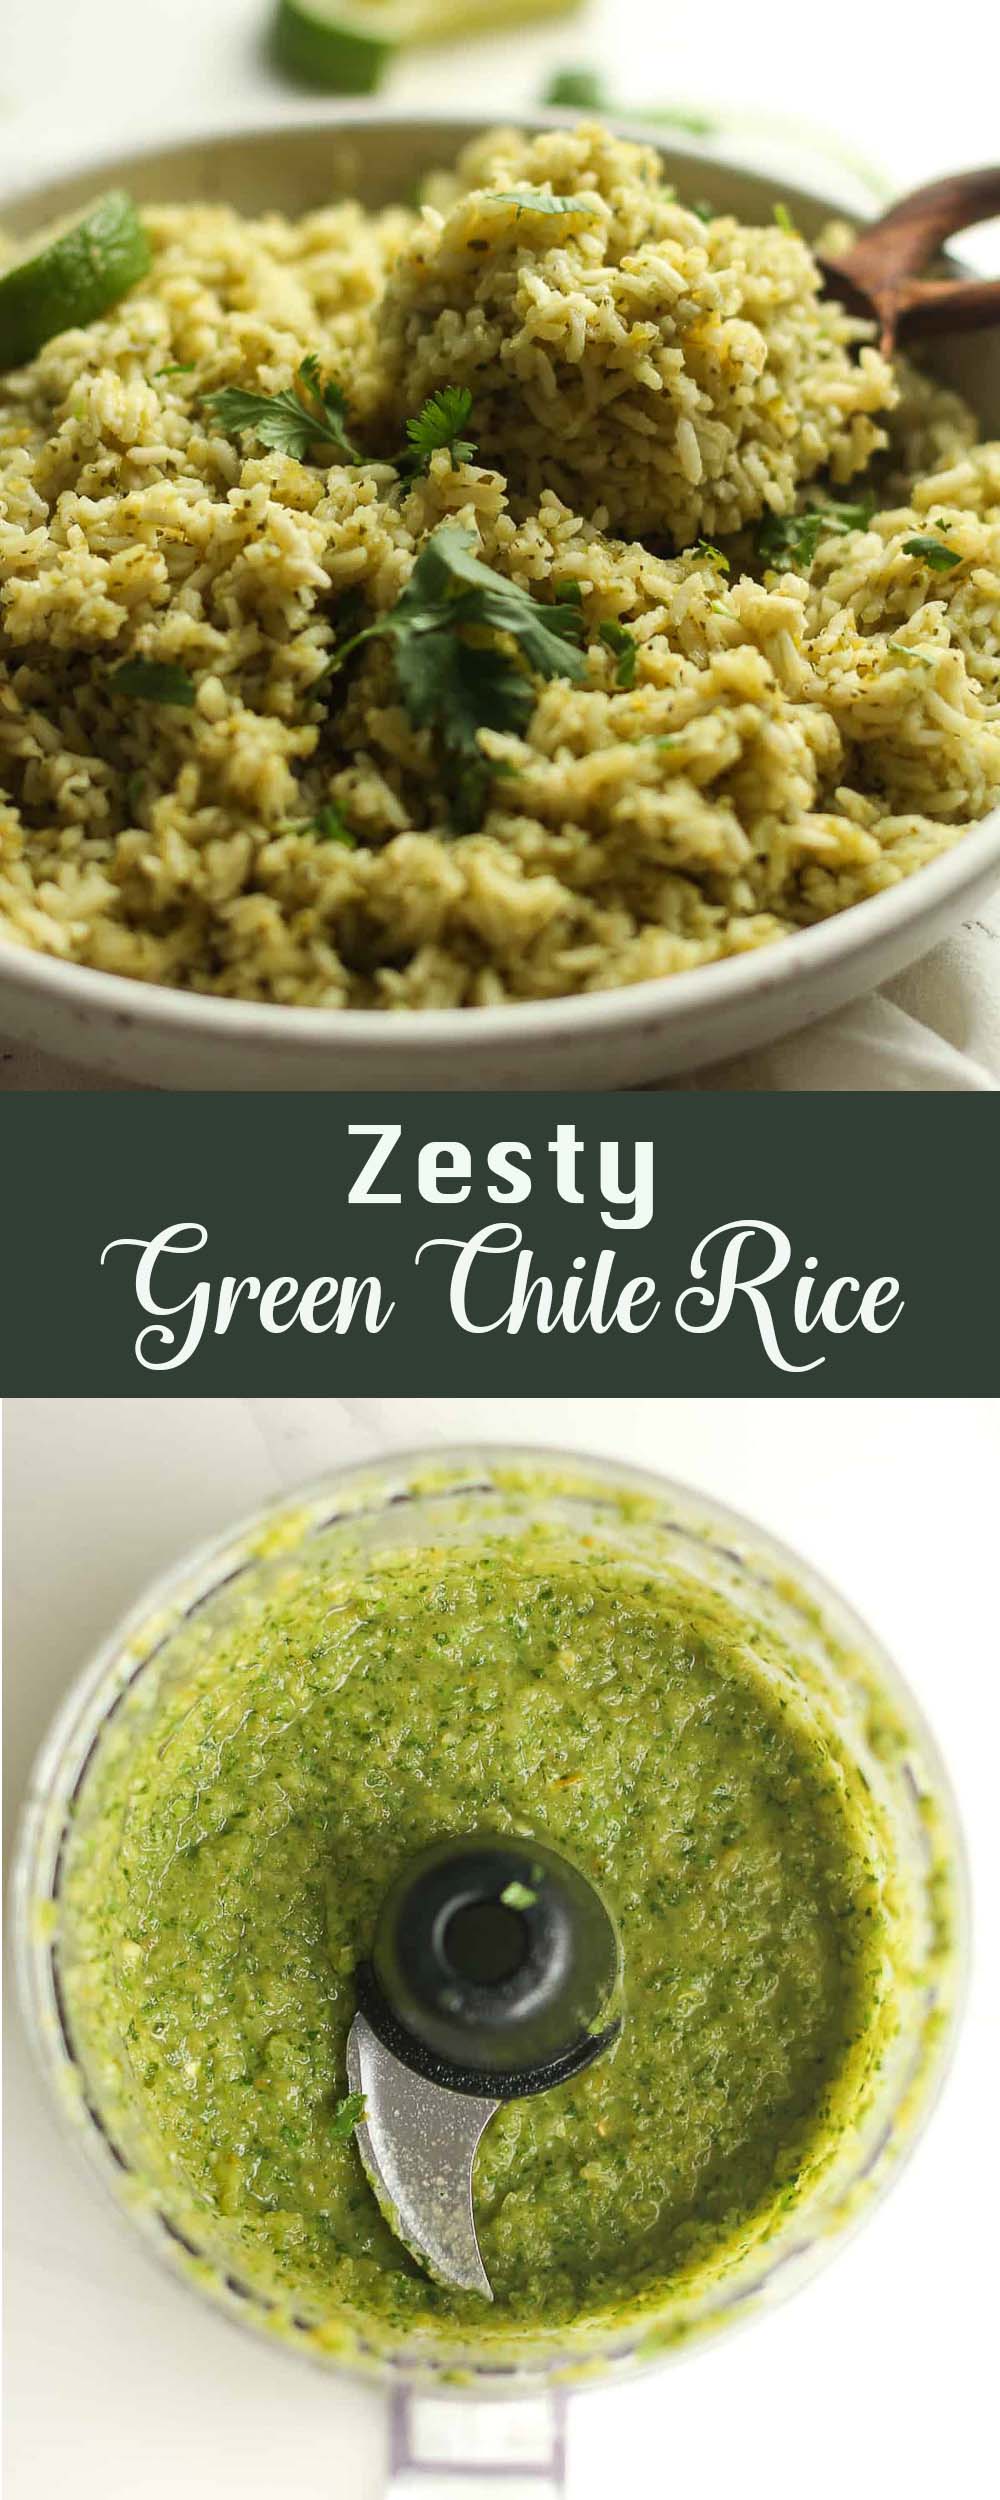 A collage of zest green Chile rice photos.